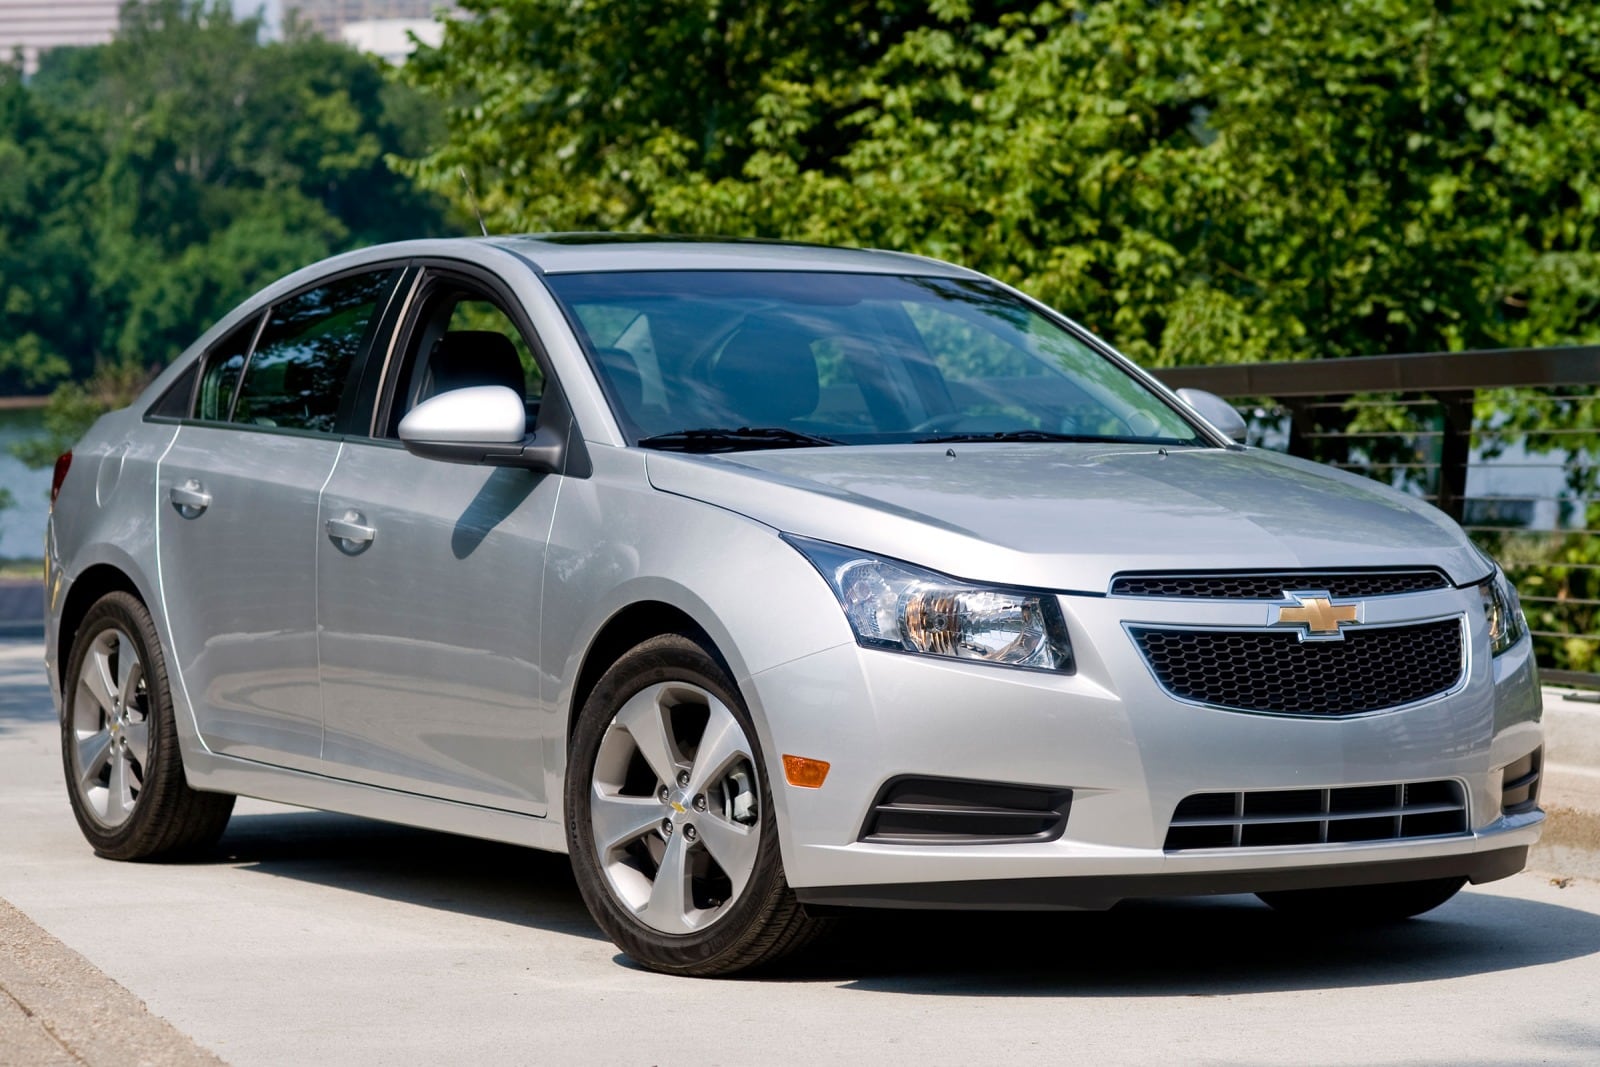 2011 Chevy Cruze Review & Ratings | Edmunds